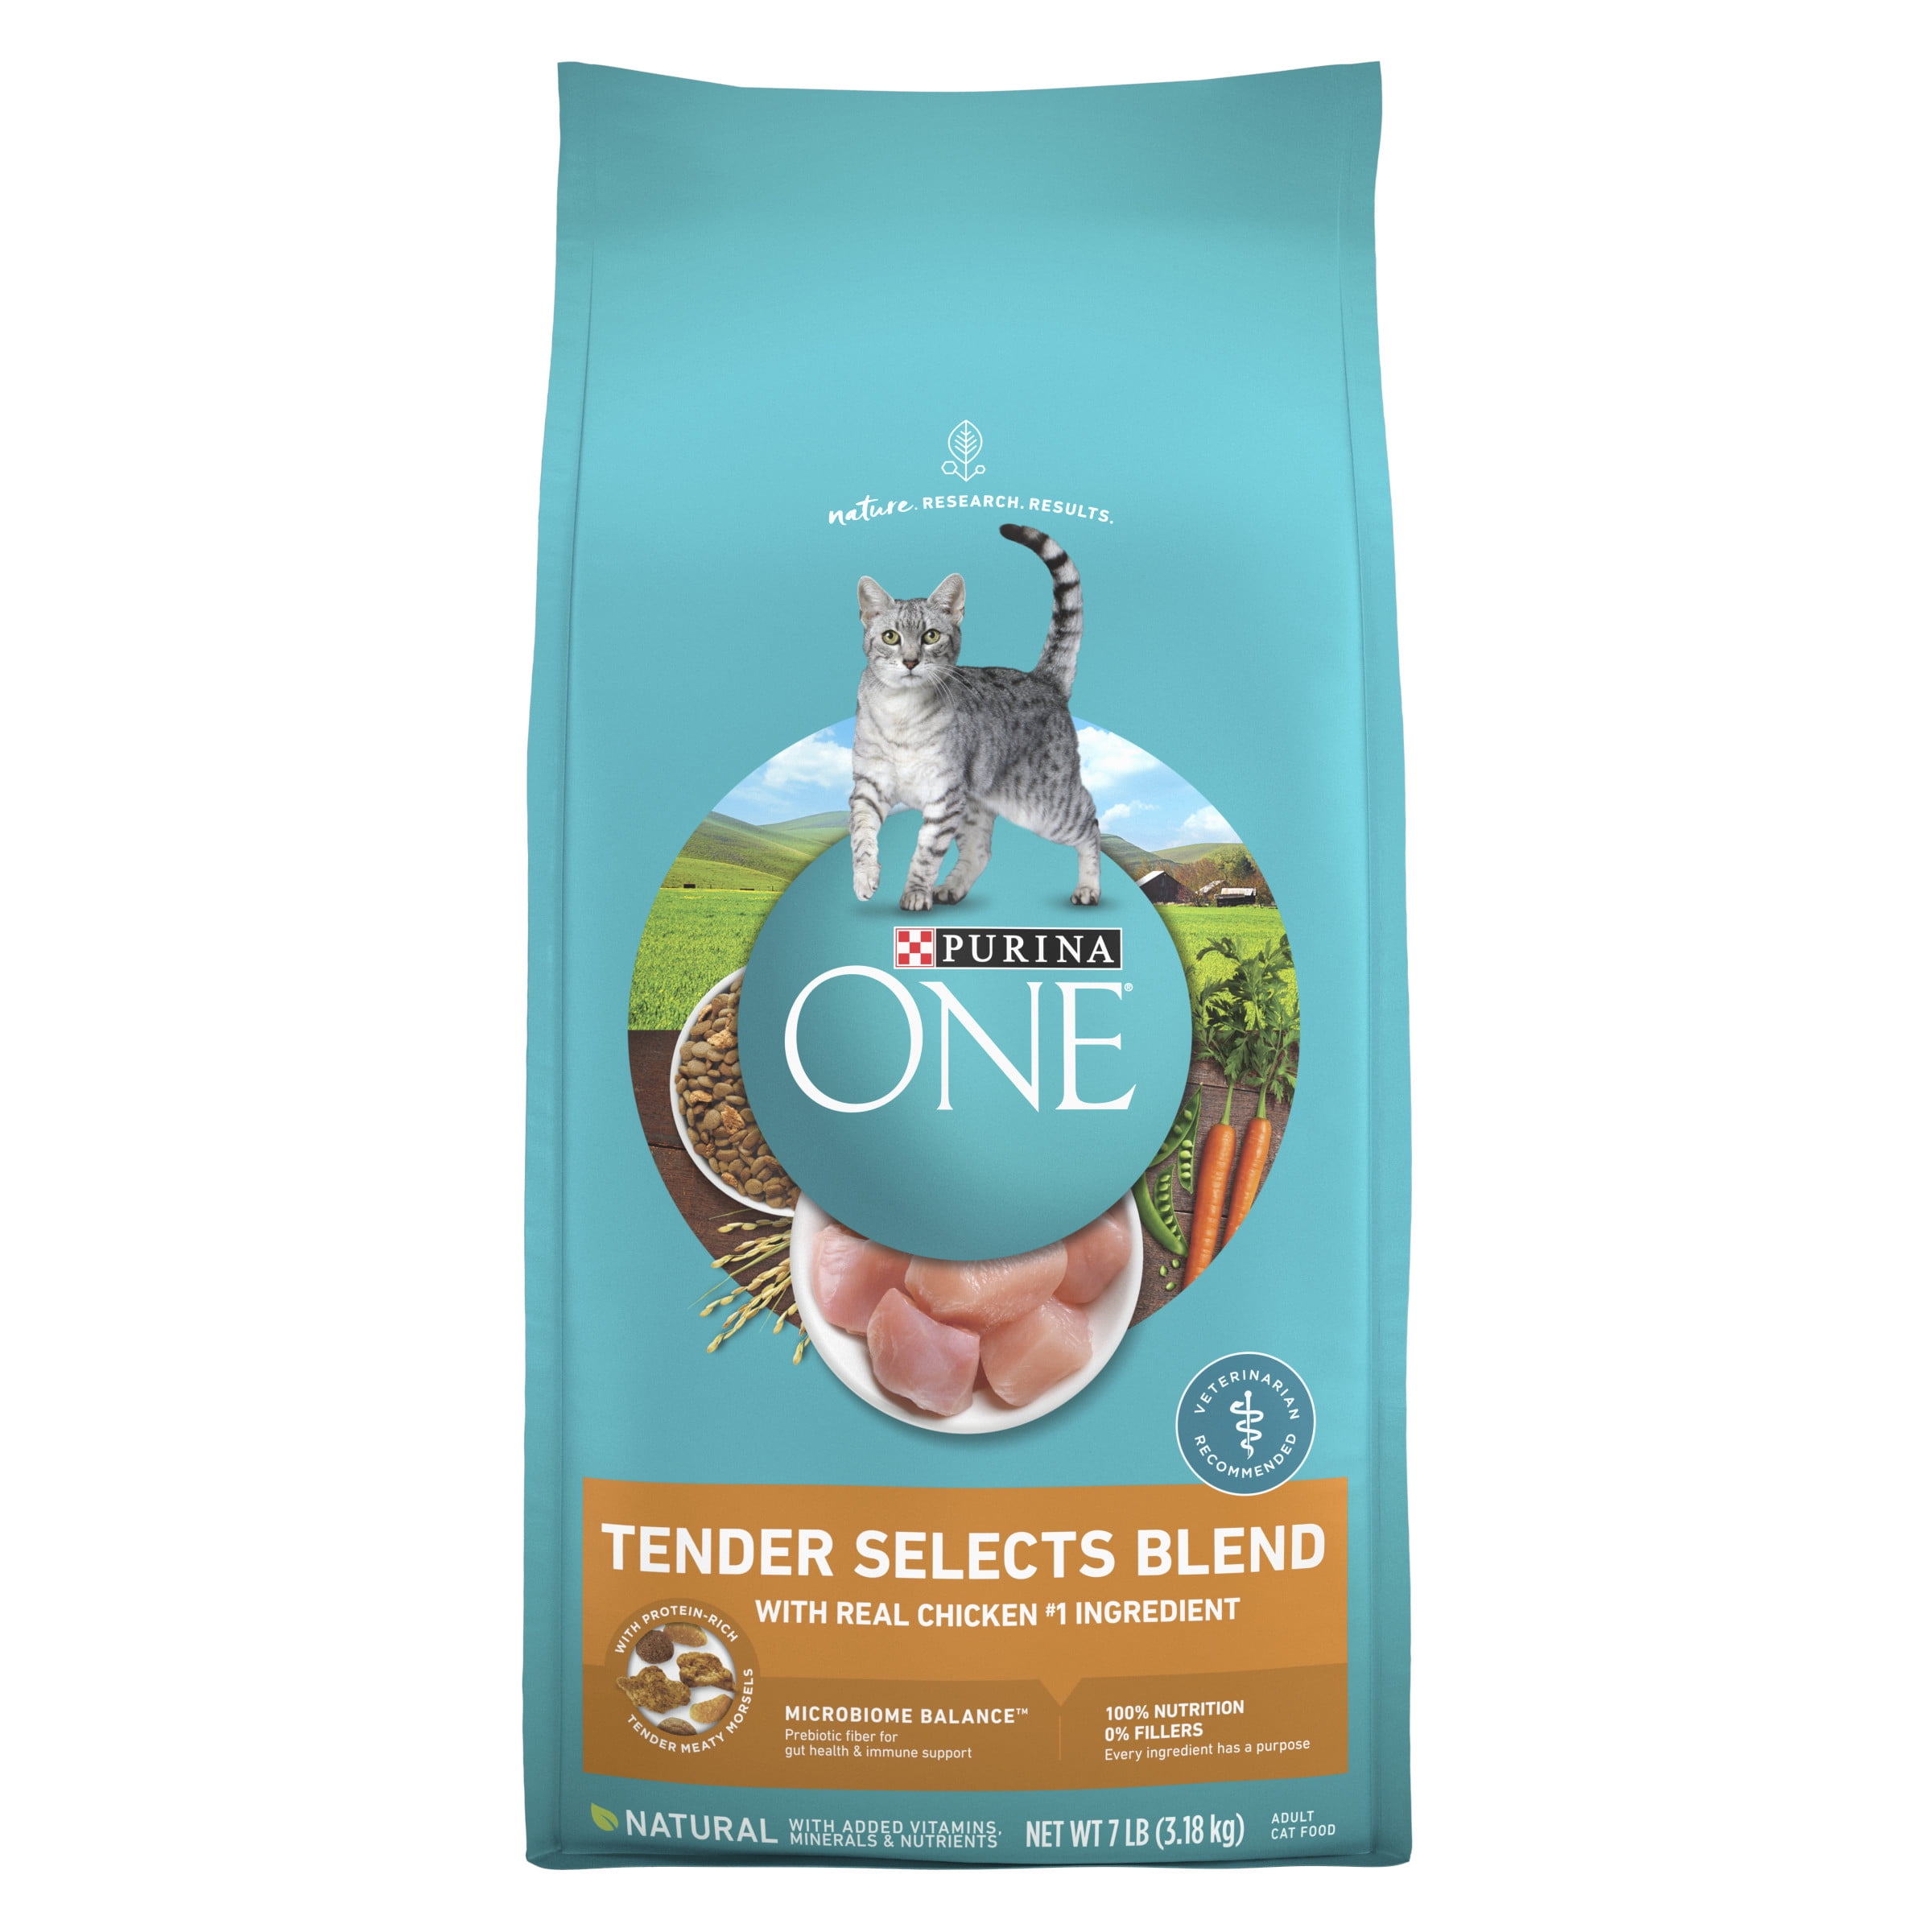 Purina One Tender Selects Blend Dry Cat Food Chicken, 7 lb Bag